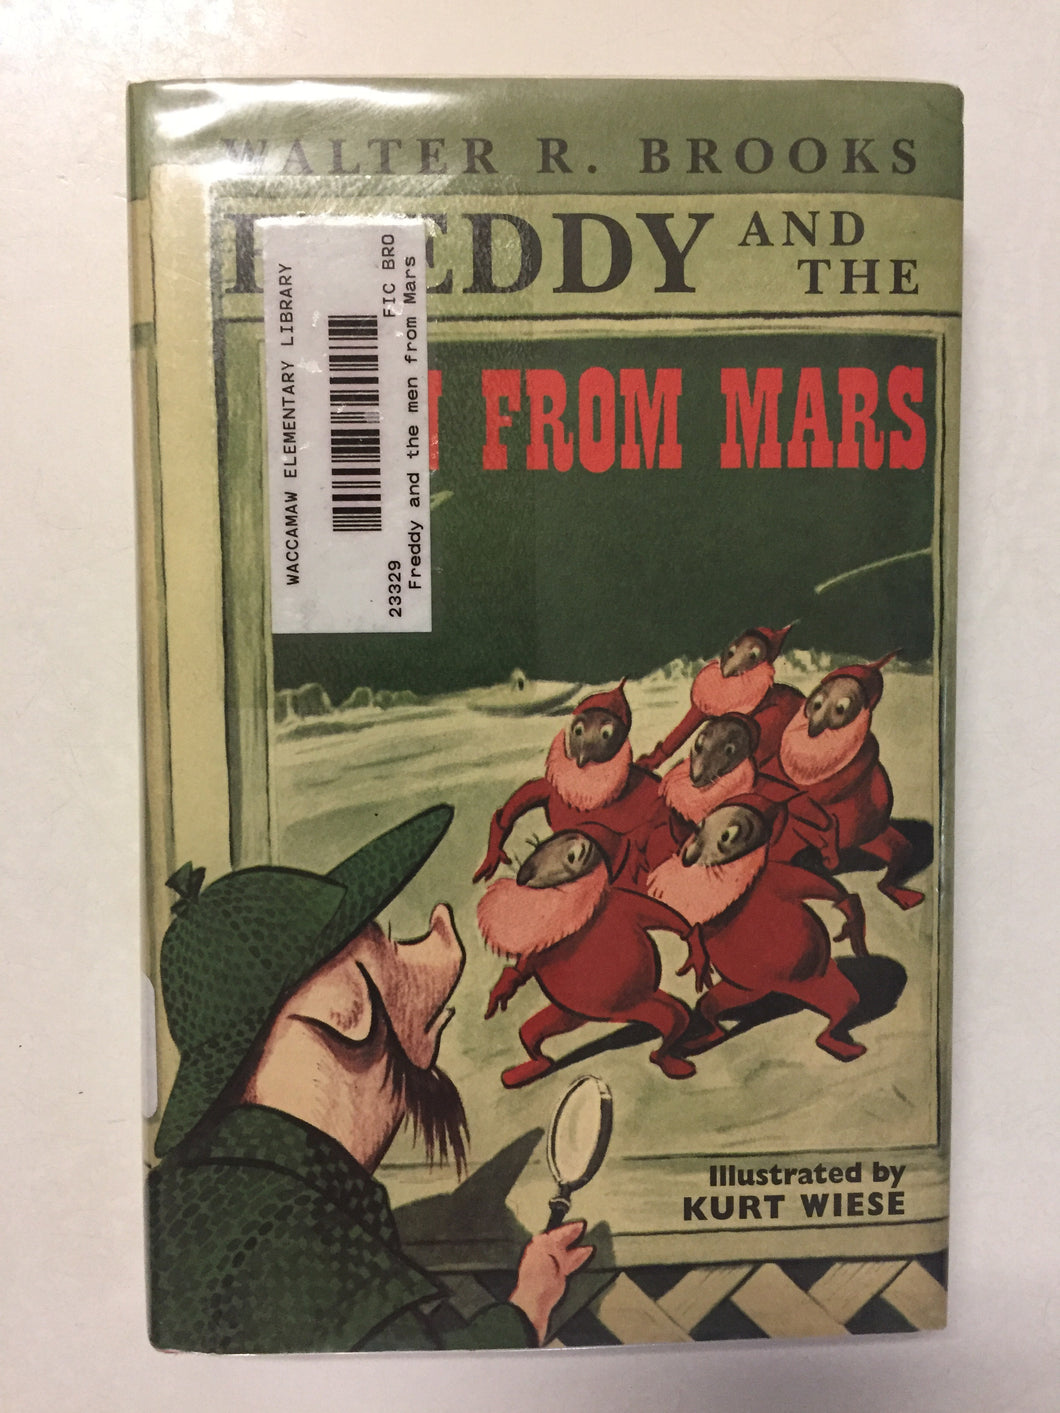 Freddy and the Men From Mars - Slick Cat Books 